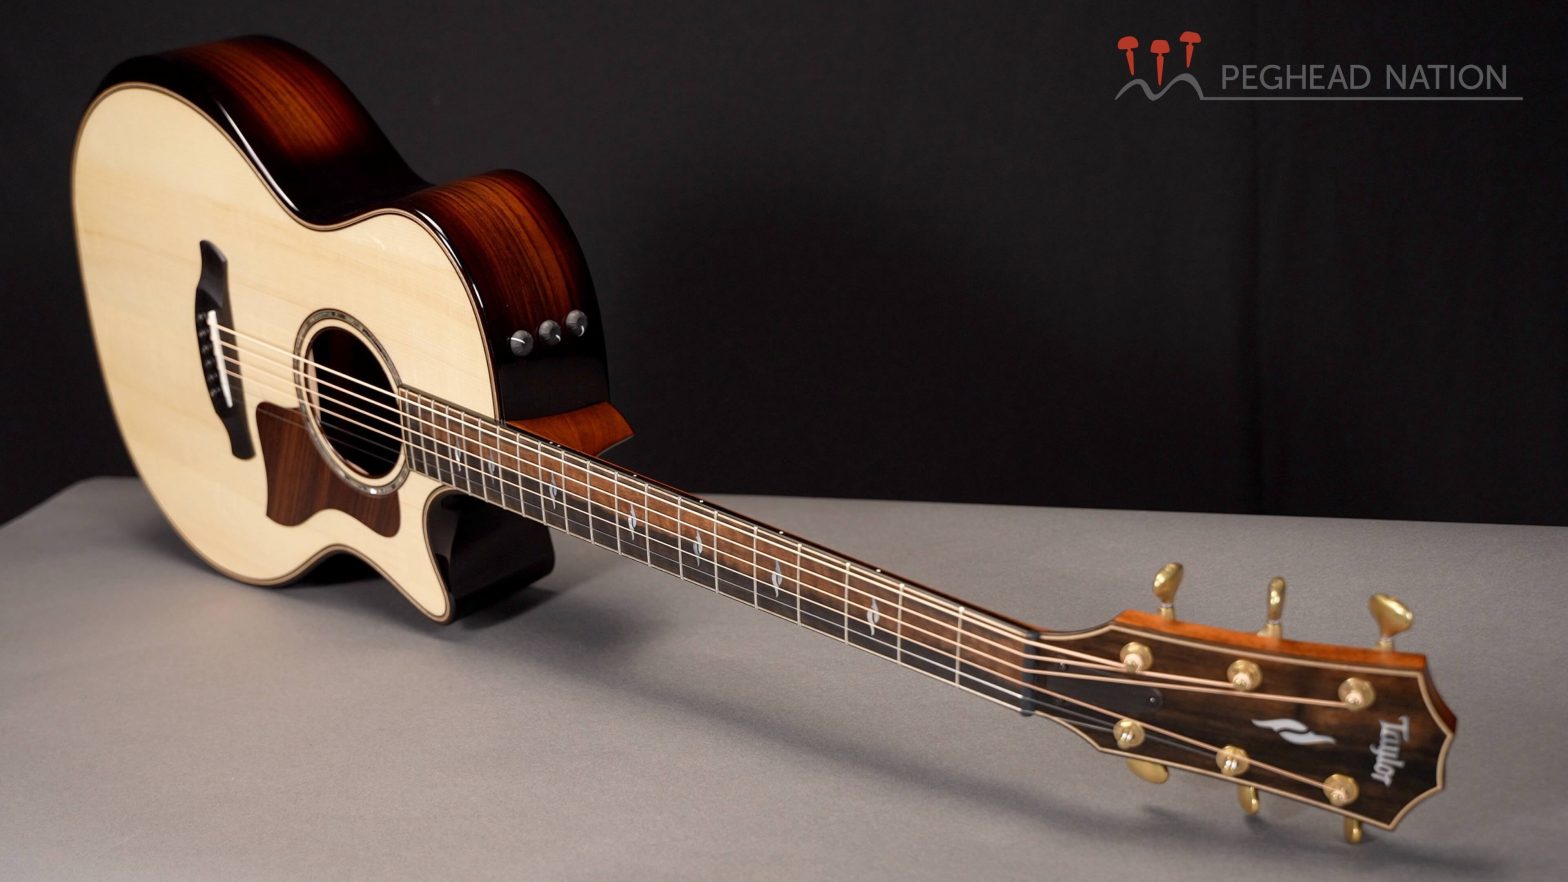 Taylor 324 CE Builders' Edition  REVIEW - Guitar Interactive Magazine